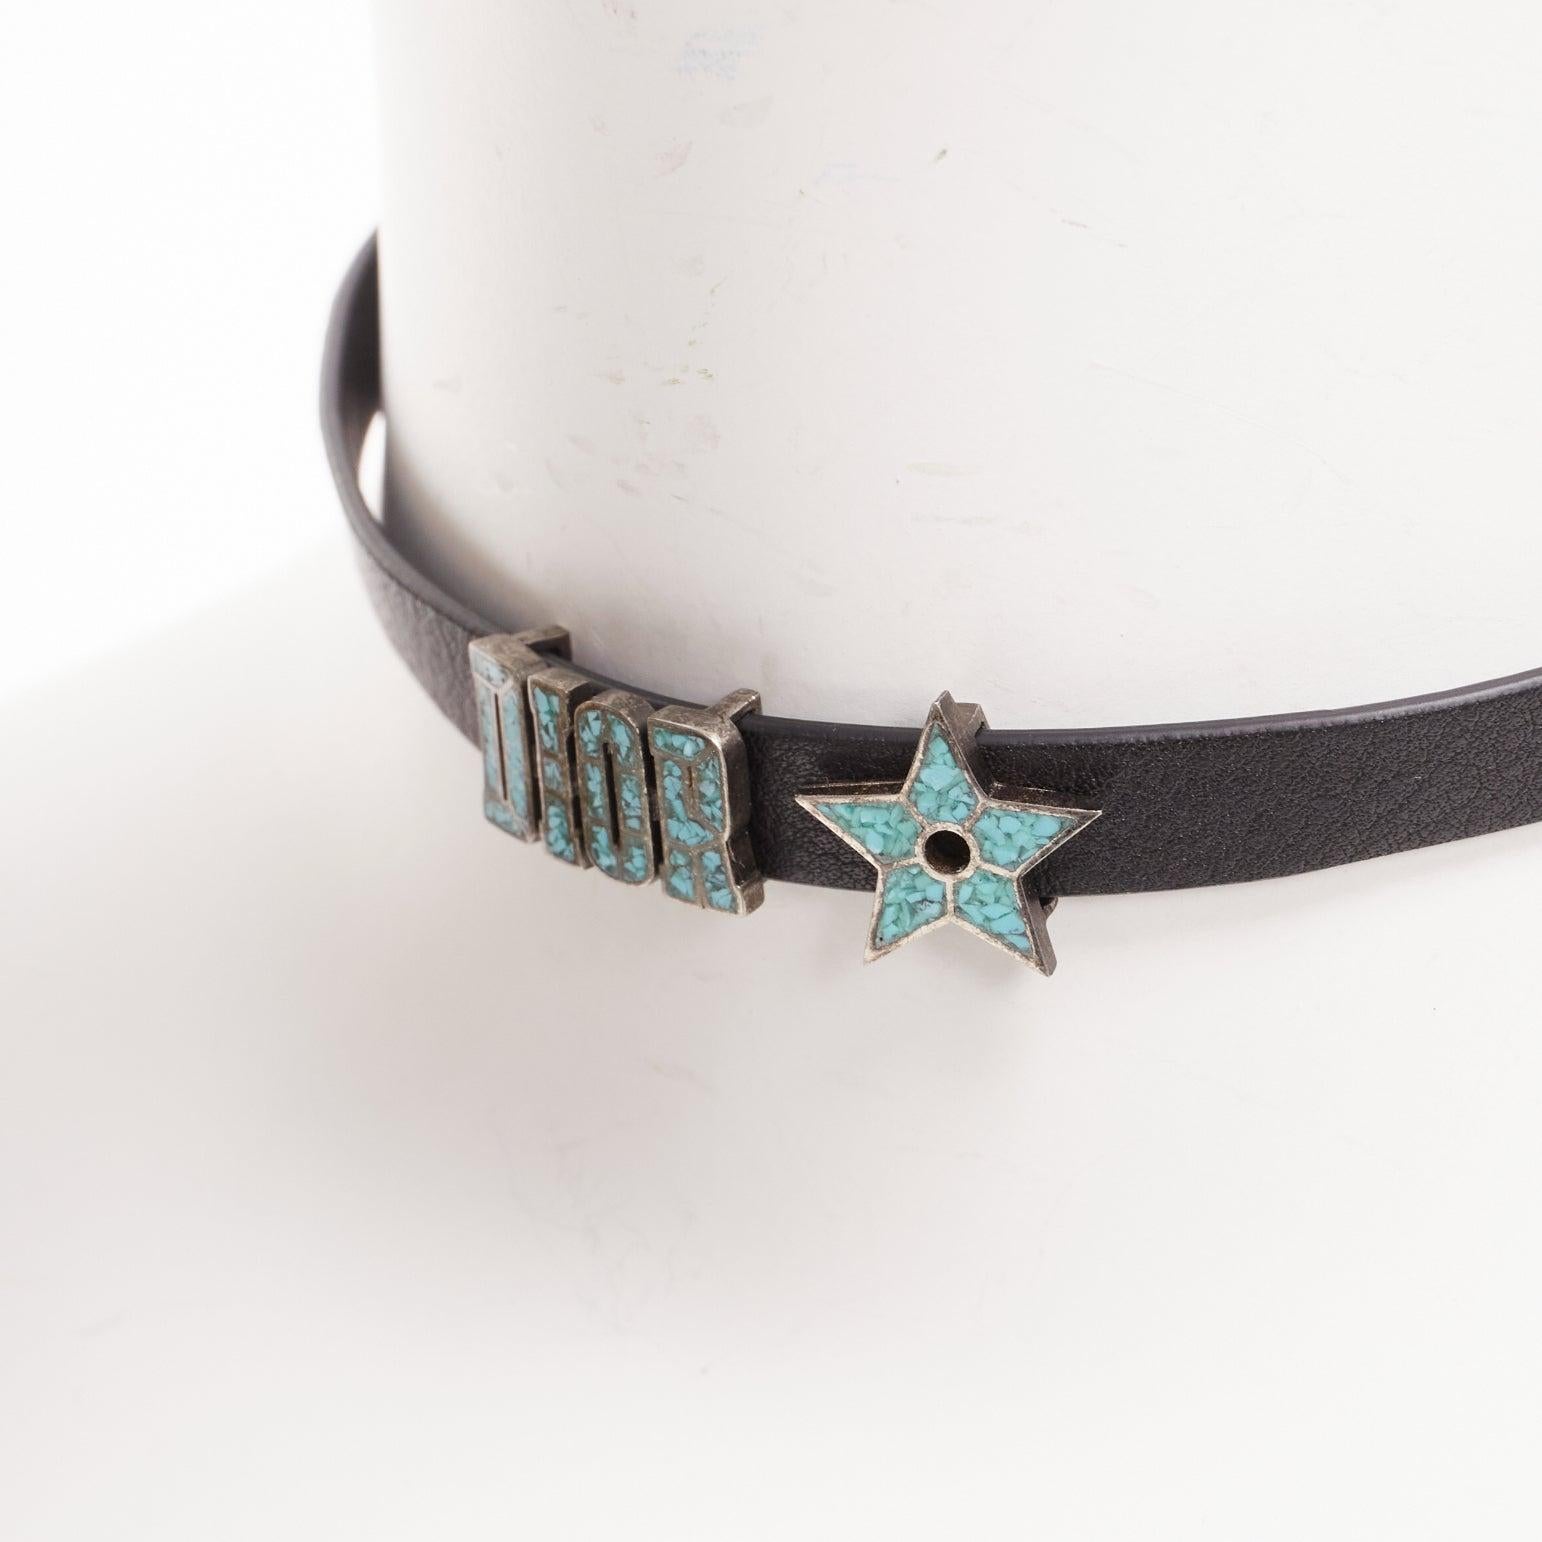 CHRISTIAN DIOR blue marble logo star charm black leather short choker
Reference: AAWC/A01036
Brand: Dior
Designer: Maria Grazia Chiuri
Material: Metal, Leather
Color: Black, Blue
Pattern: Solid
Closure: Belt
Lining: Black